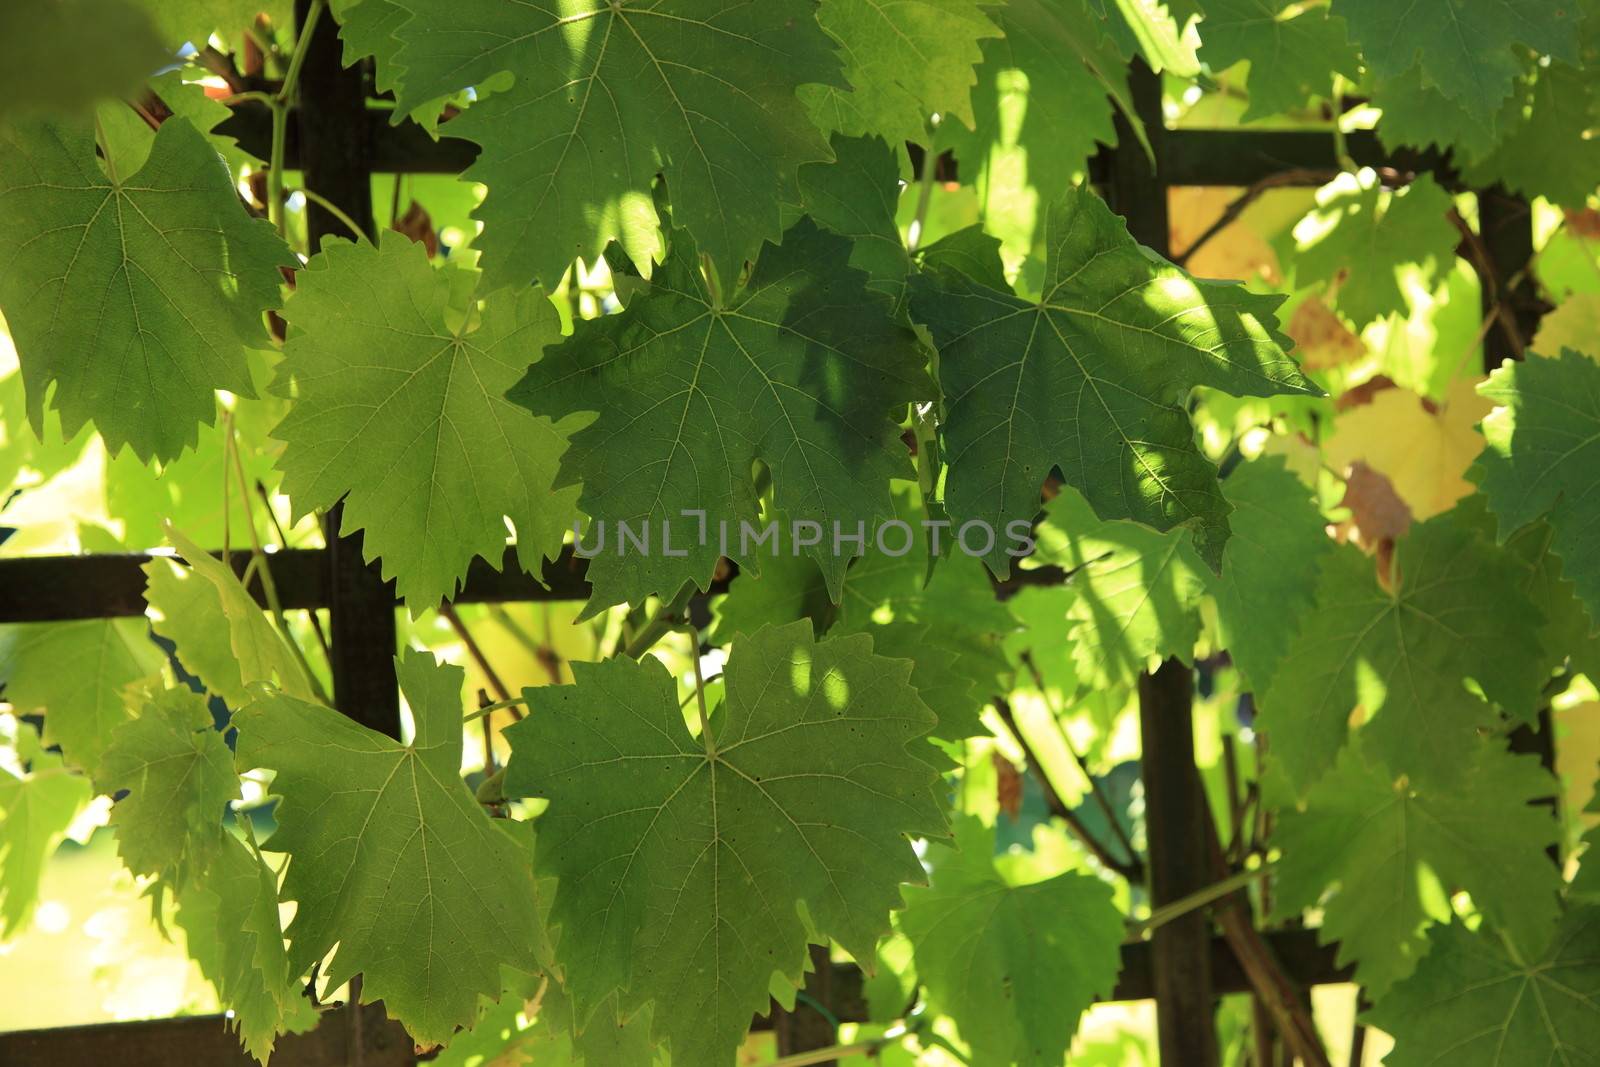 Grapevine growing on a trellis by Farina6000